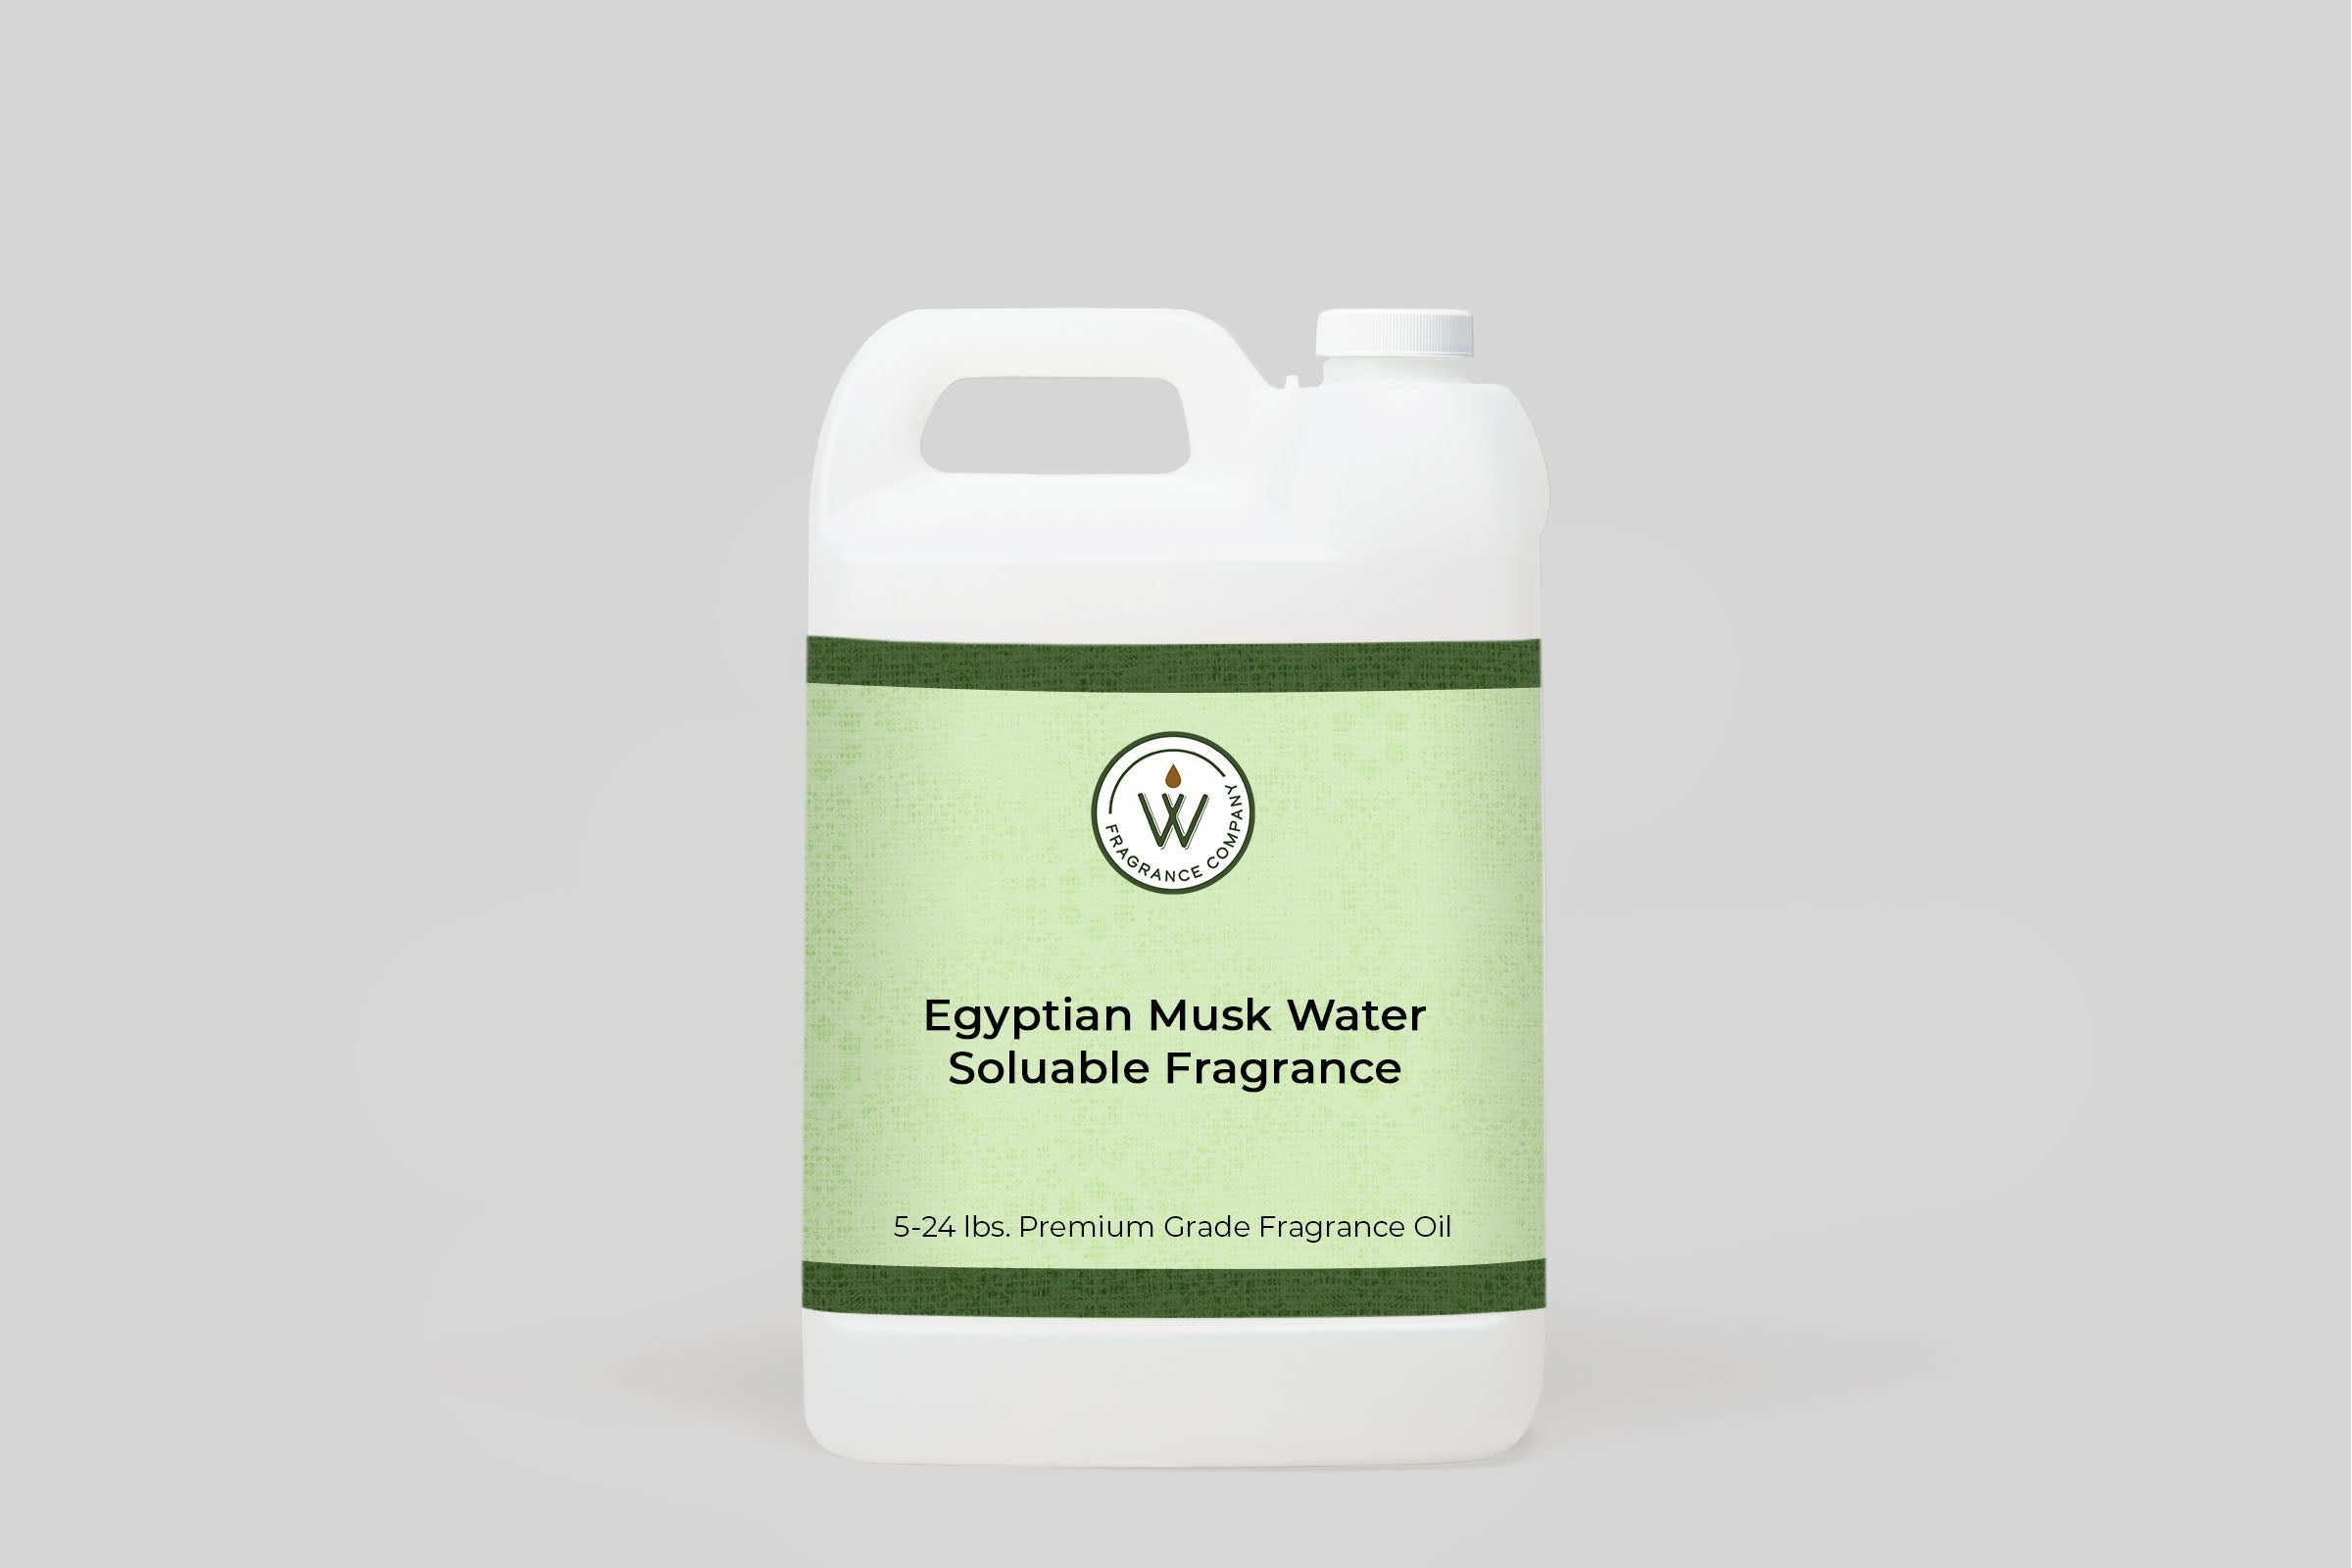 Egyptian Musk Water Soluble Fragrance